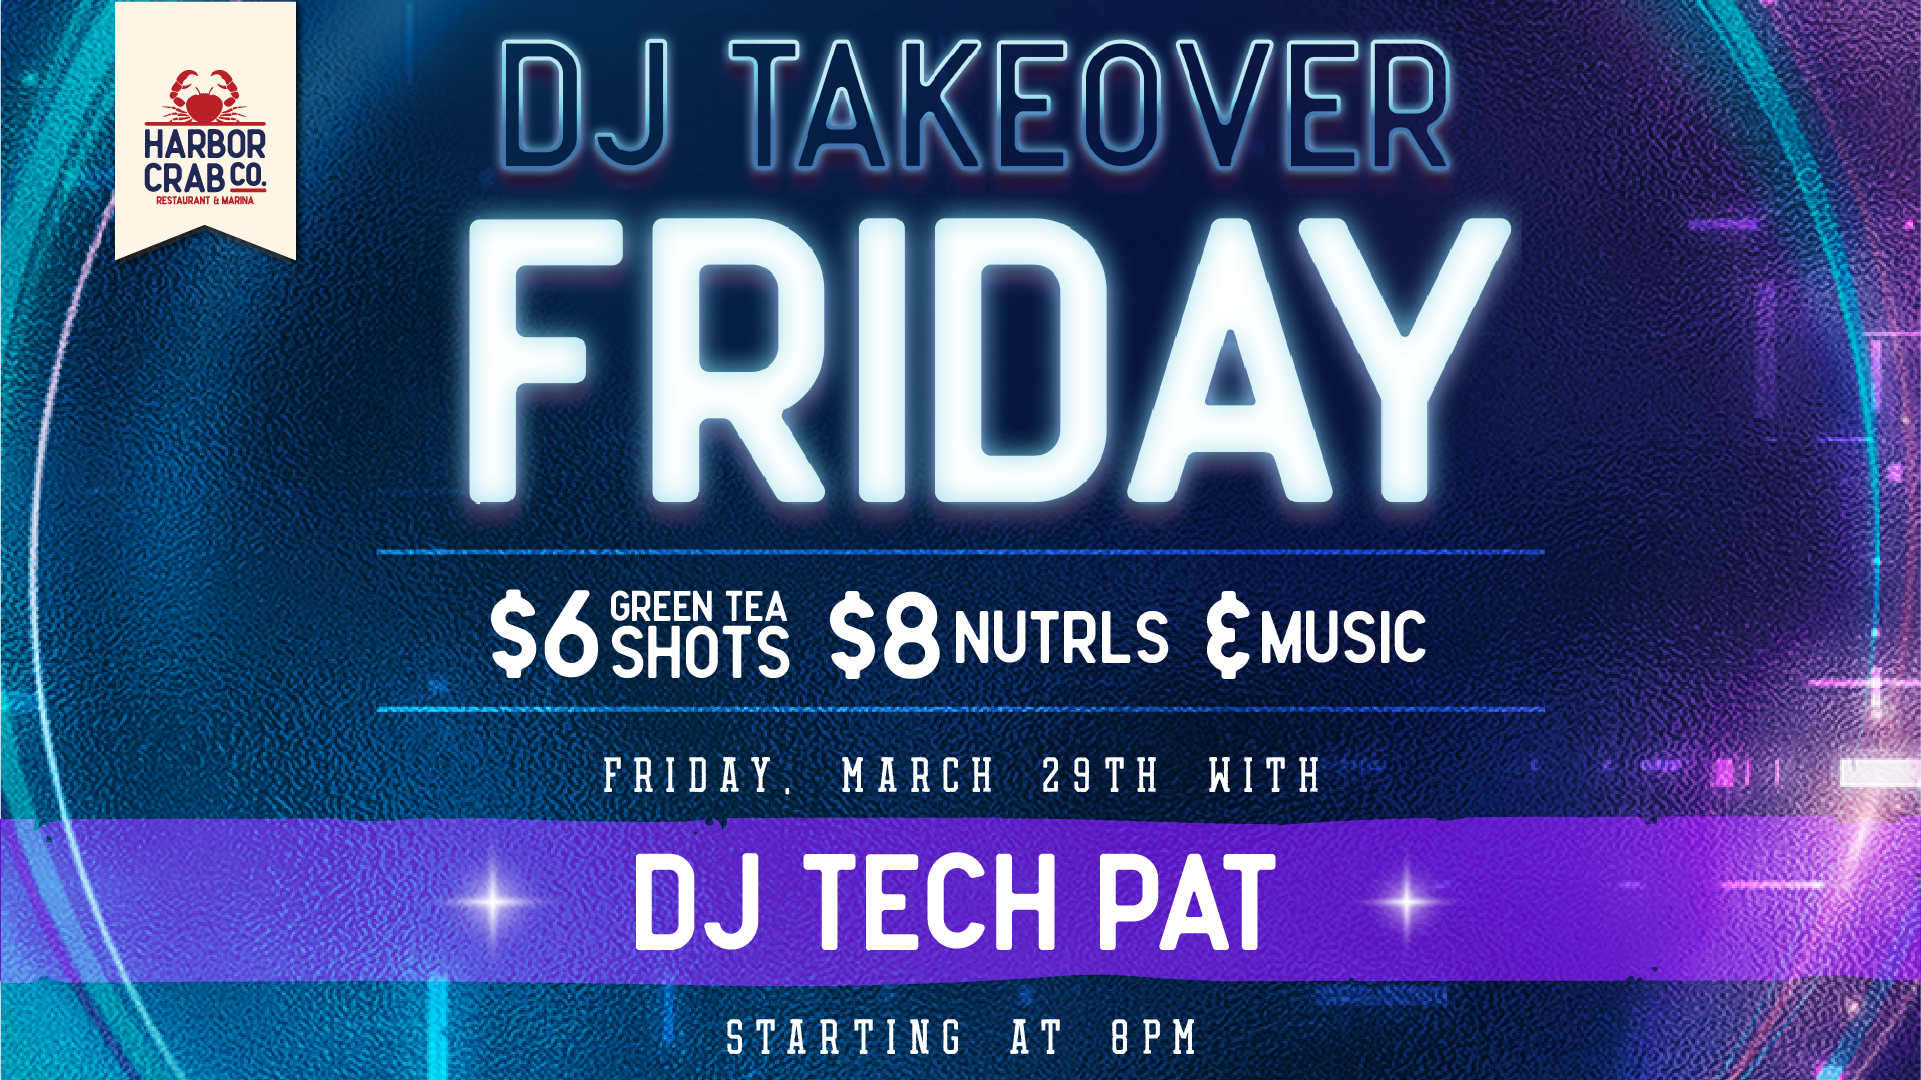 Harbor Crab Co. event announcement for DJ Tech Pat's performance on Friday, March 29th, starting at 8 PM